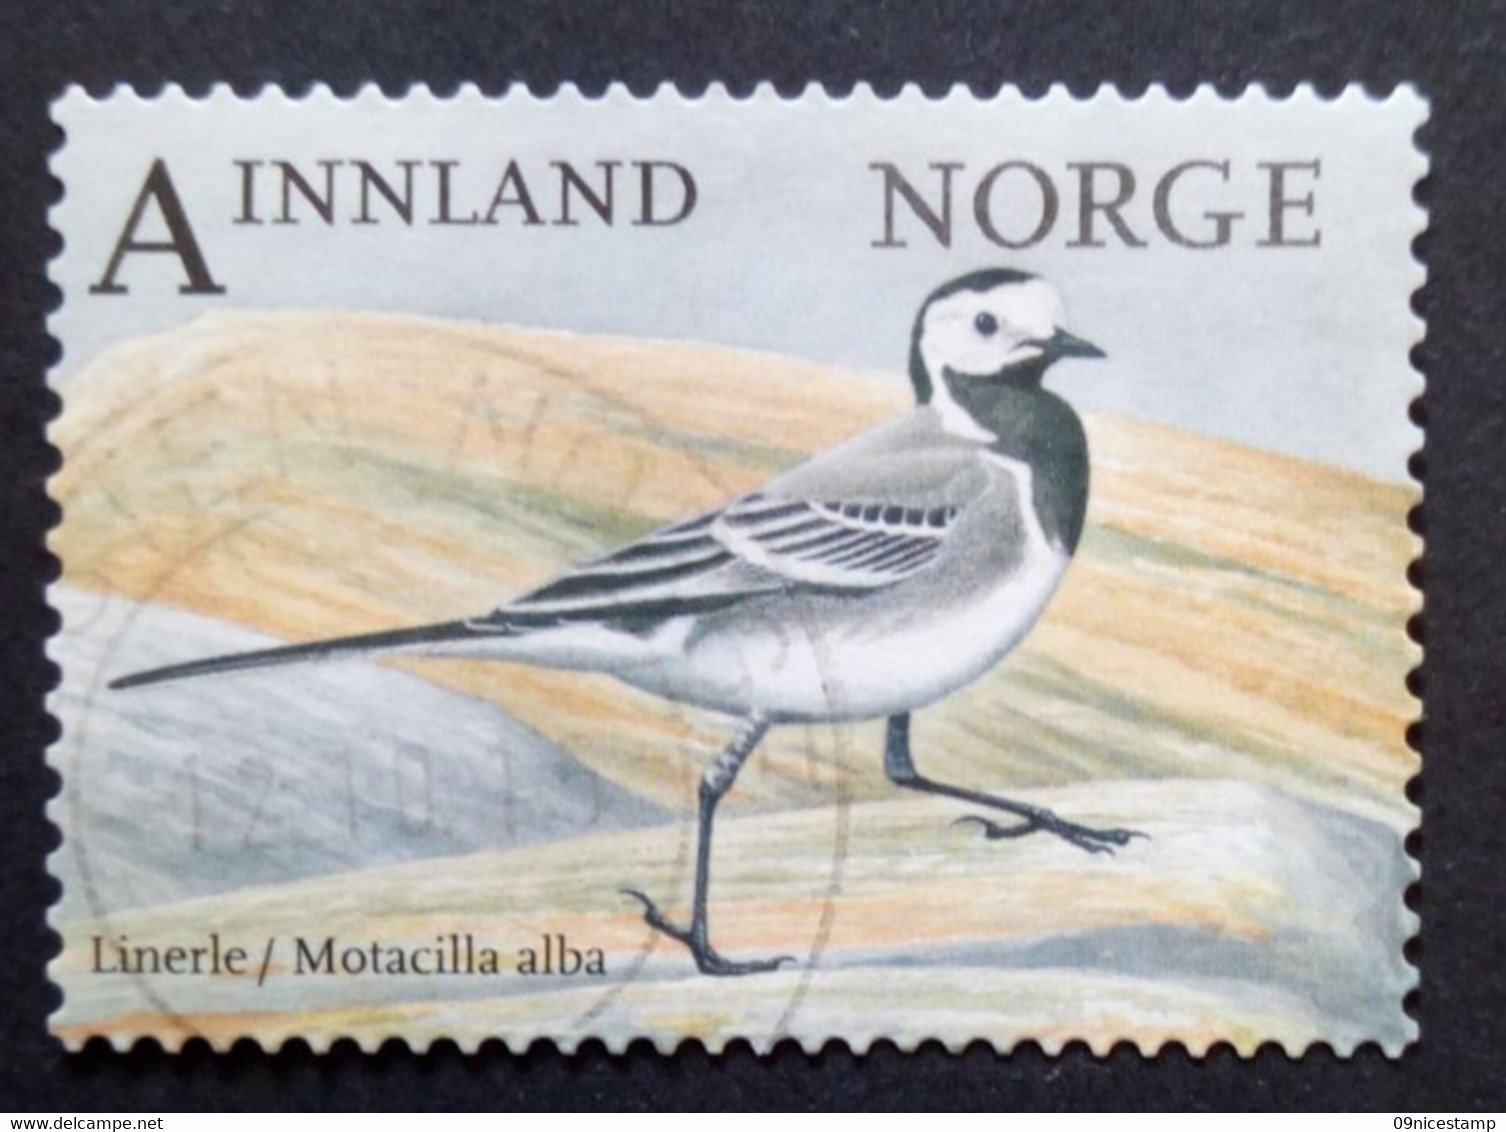 Norway, Year 2015, Michel-Nr. 1895, Birds - Used Stamps